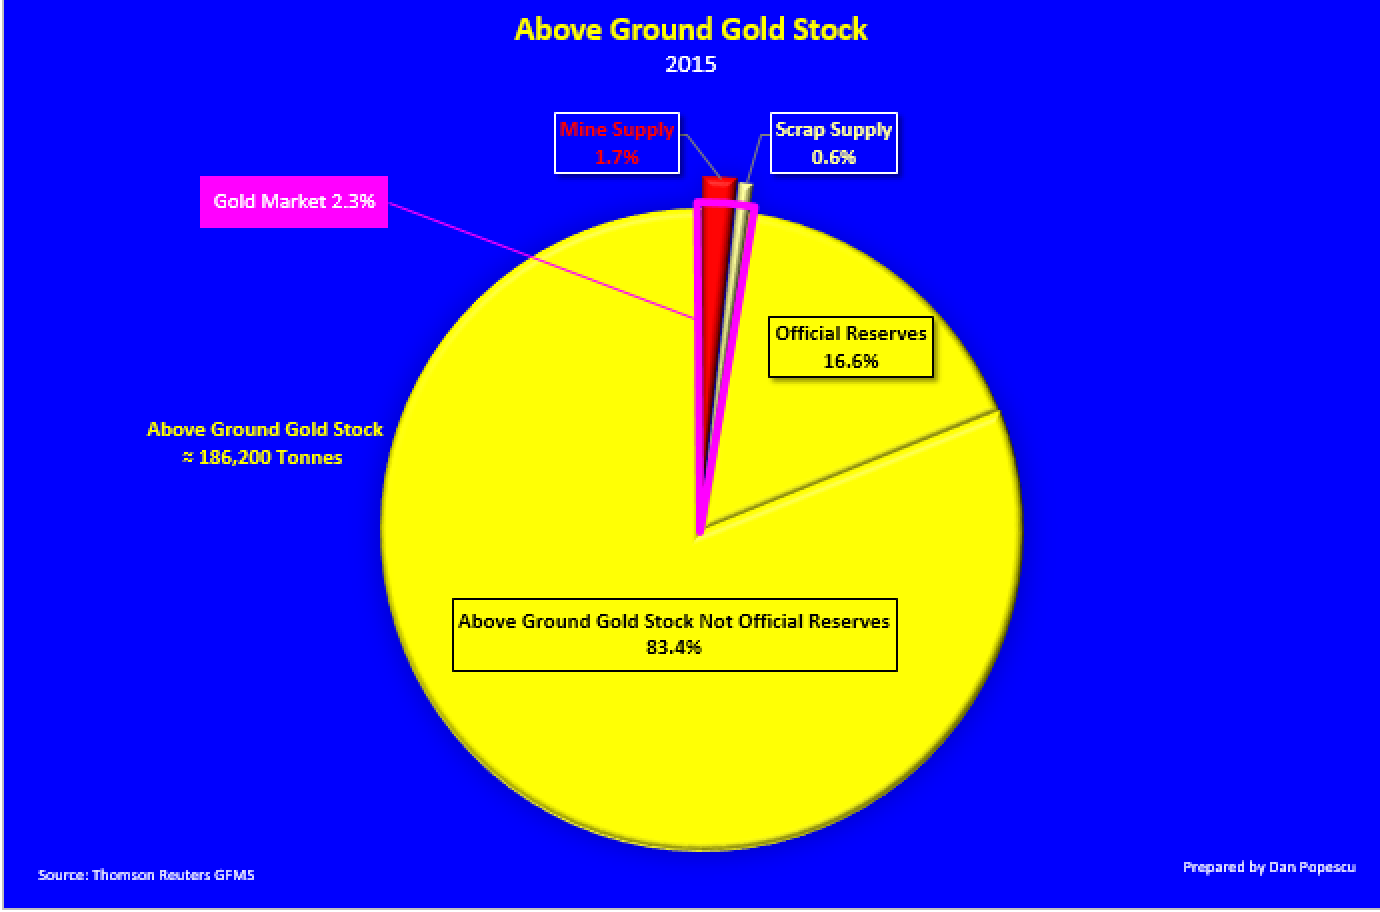 Above ground gold stock